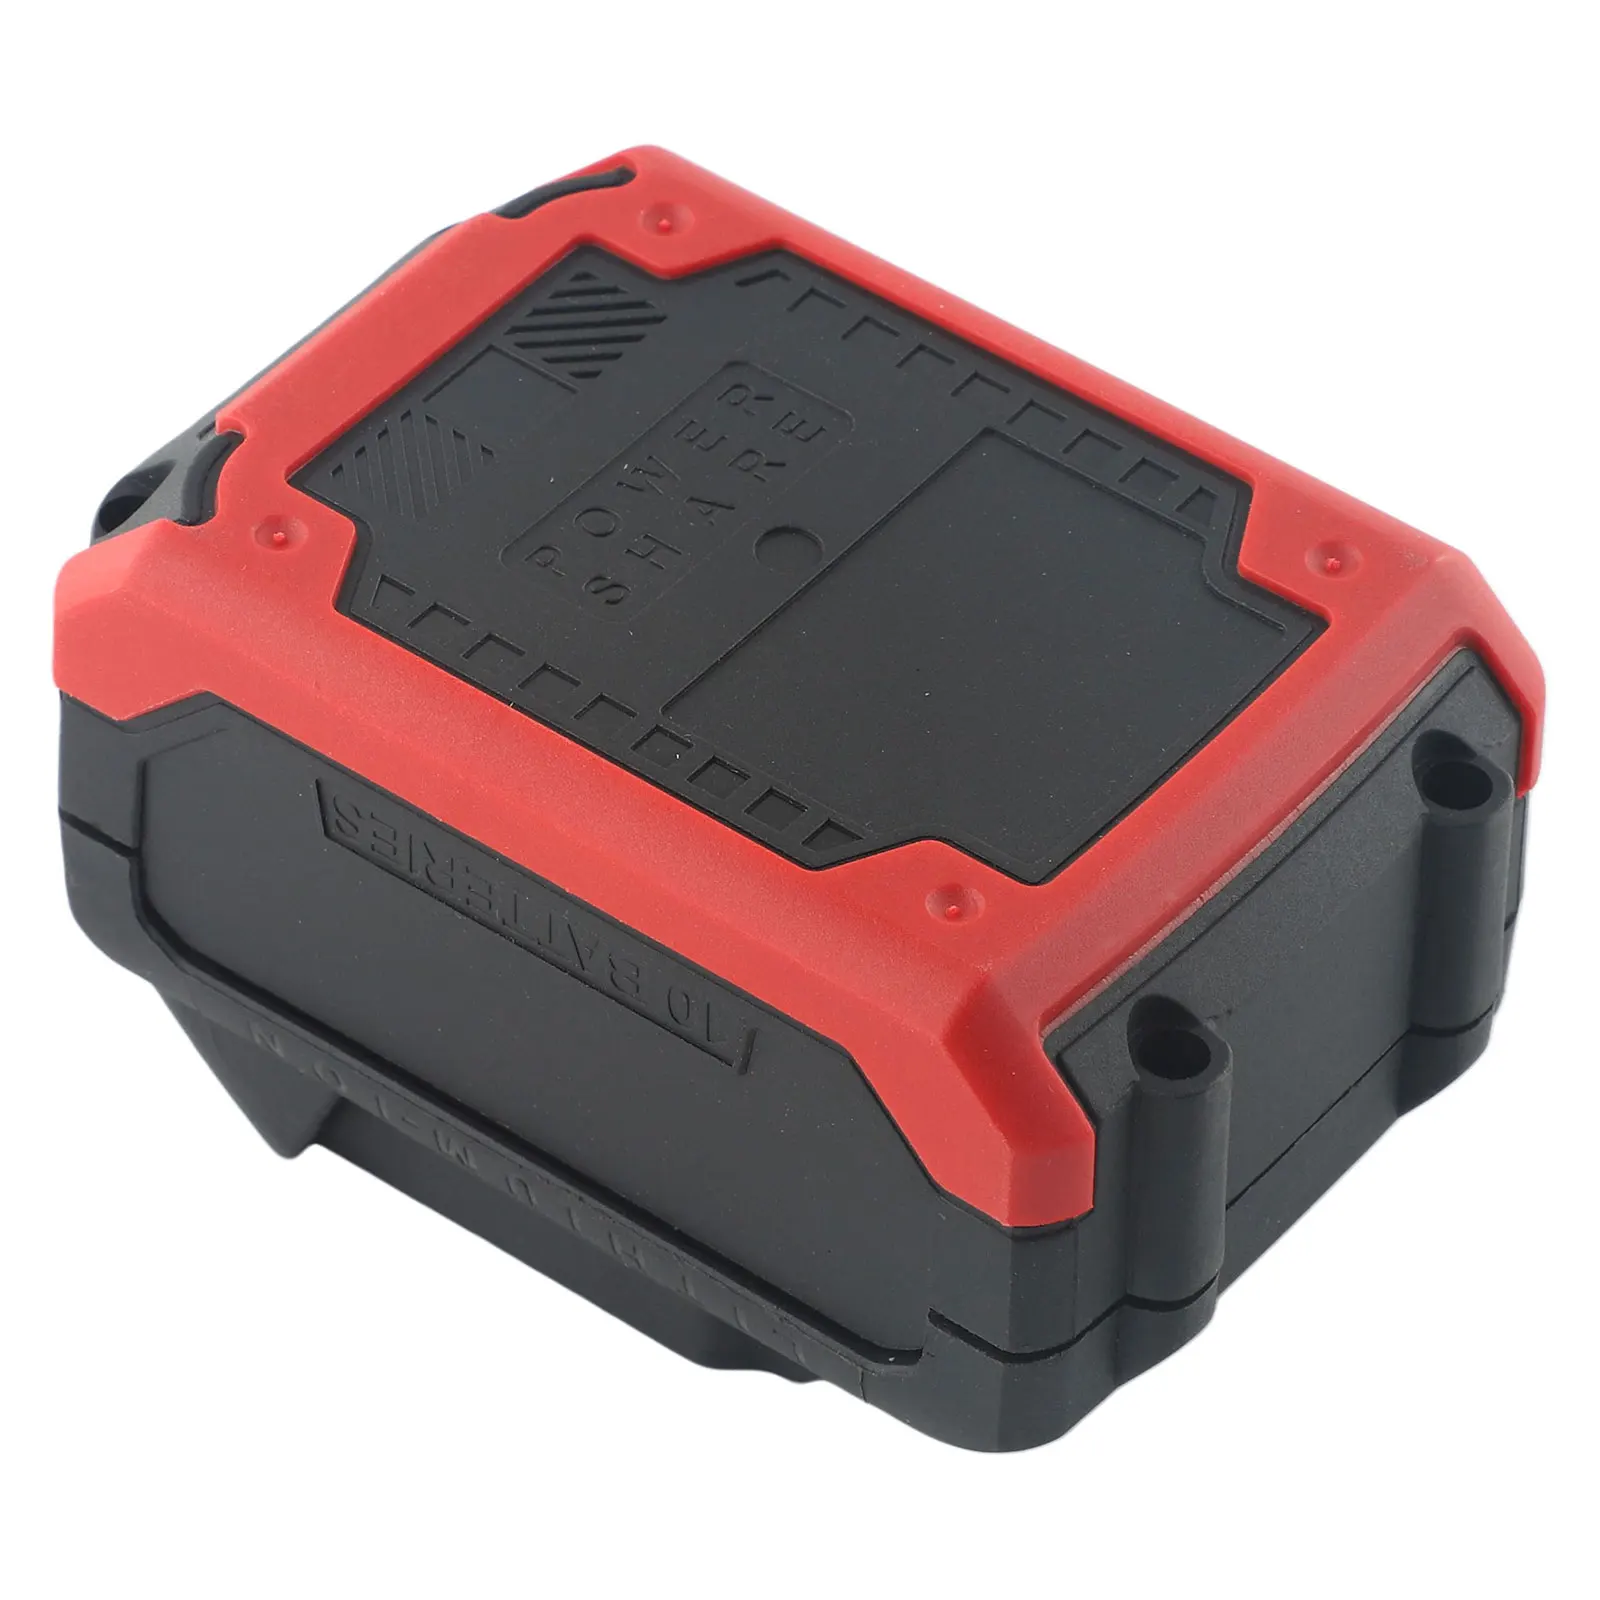 10/15/20 Cores Plastic Battery Case Storage Box Shell PCB Charging Board For Makita Battery Case Power Tool Accessories